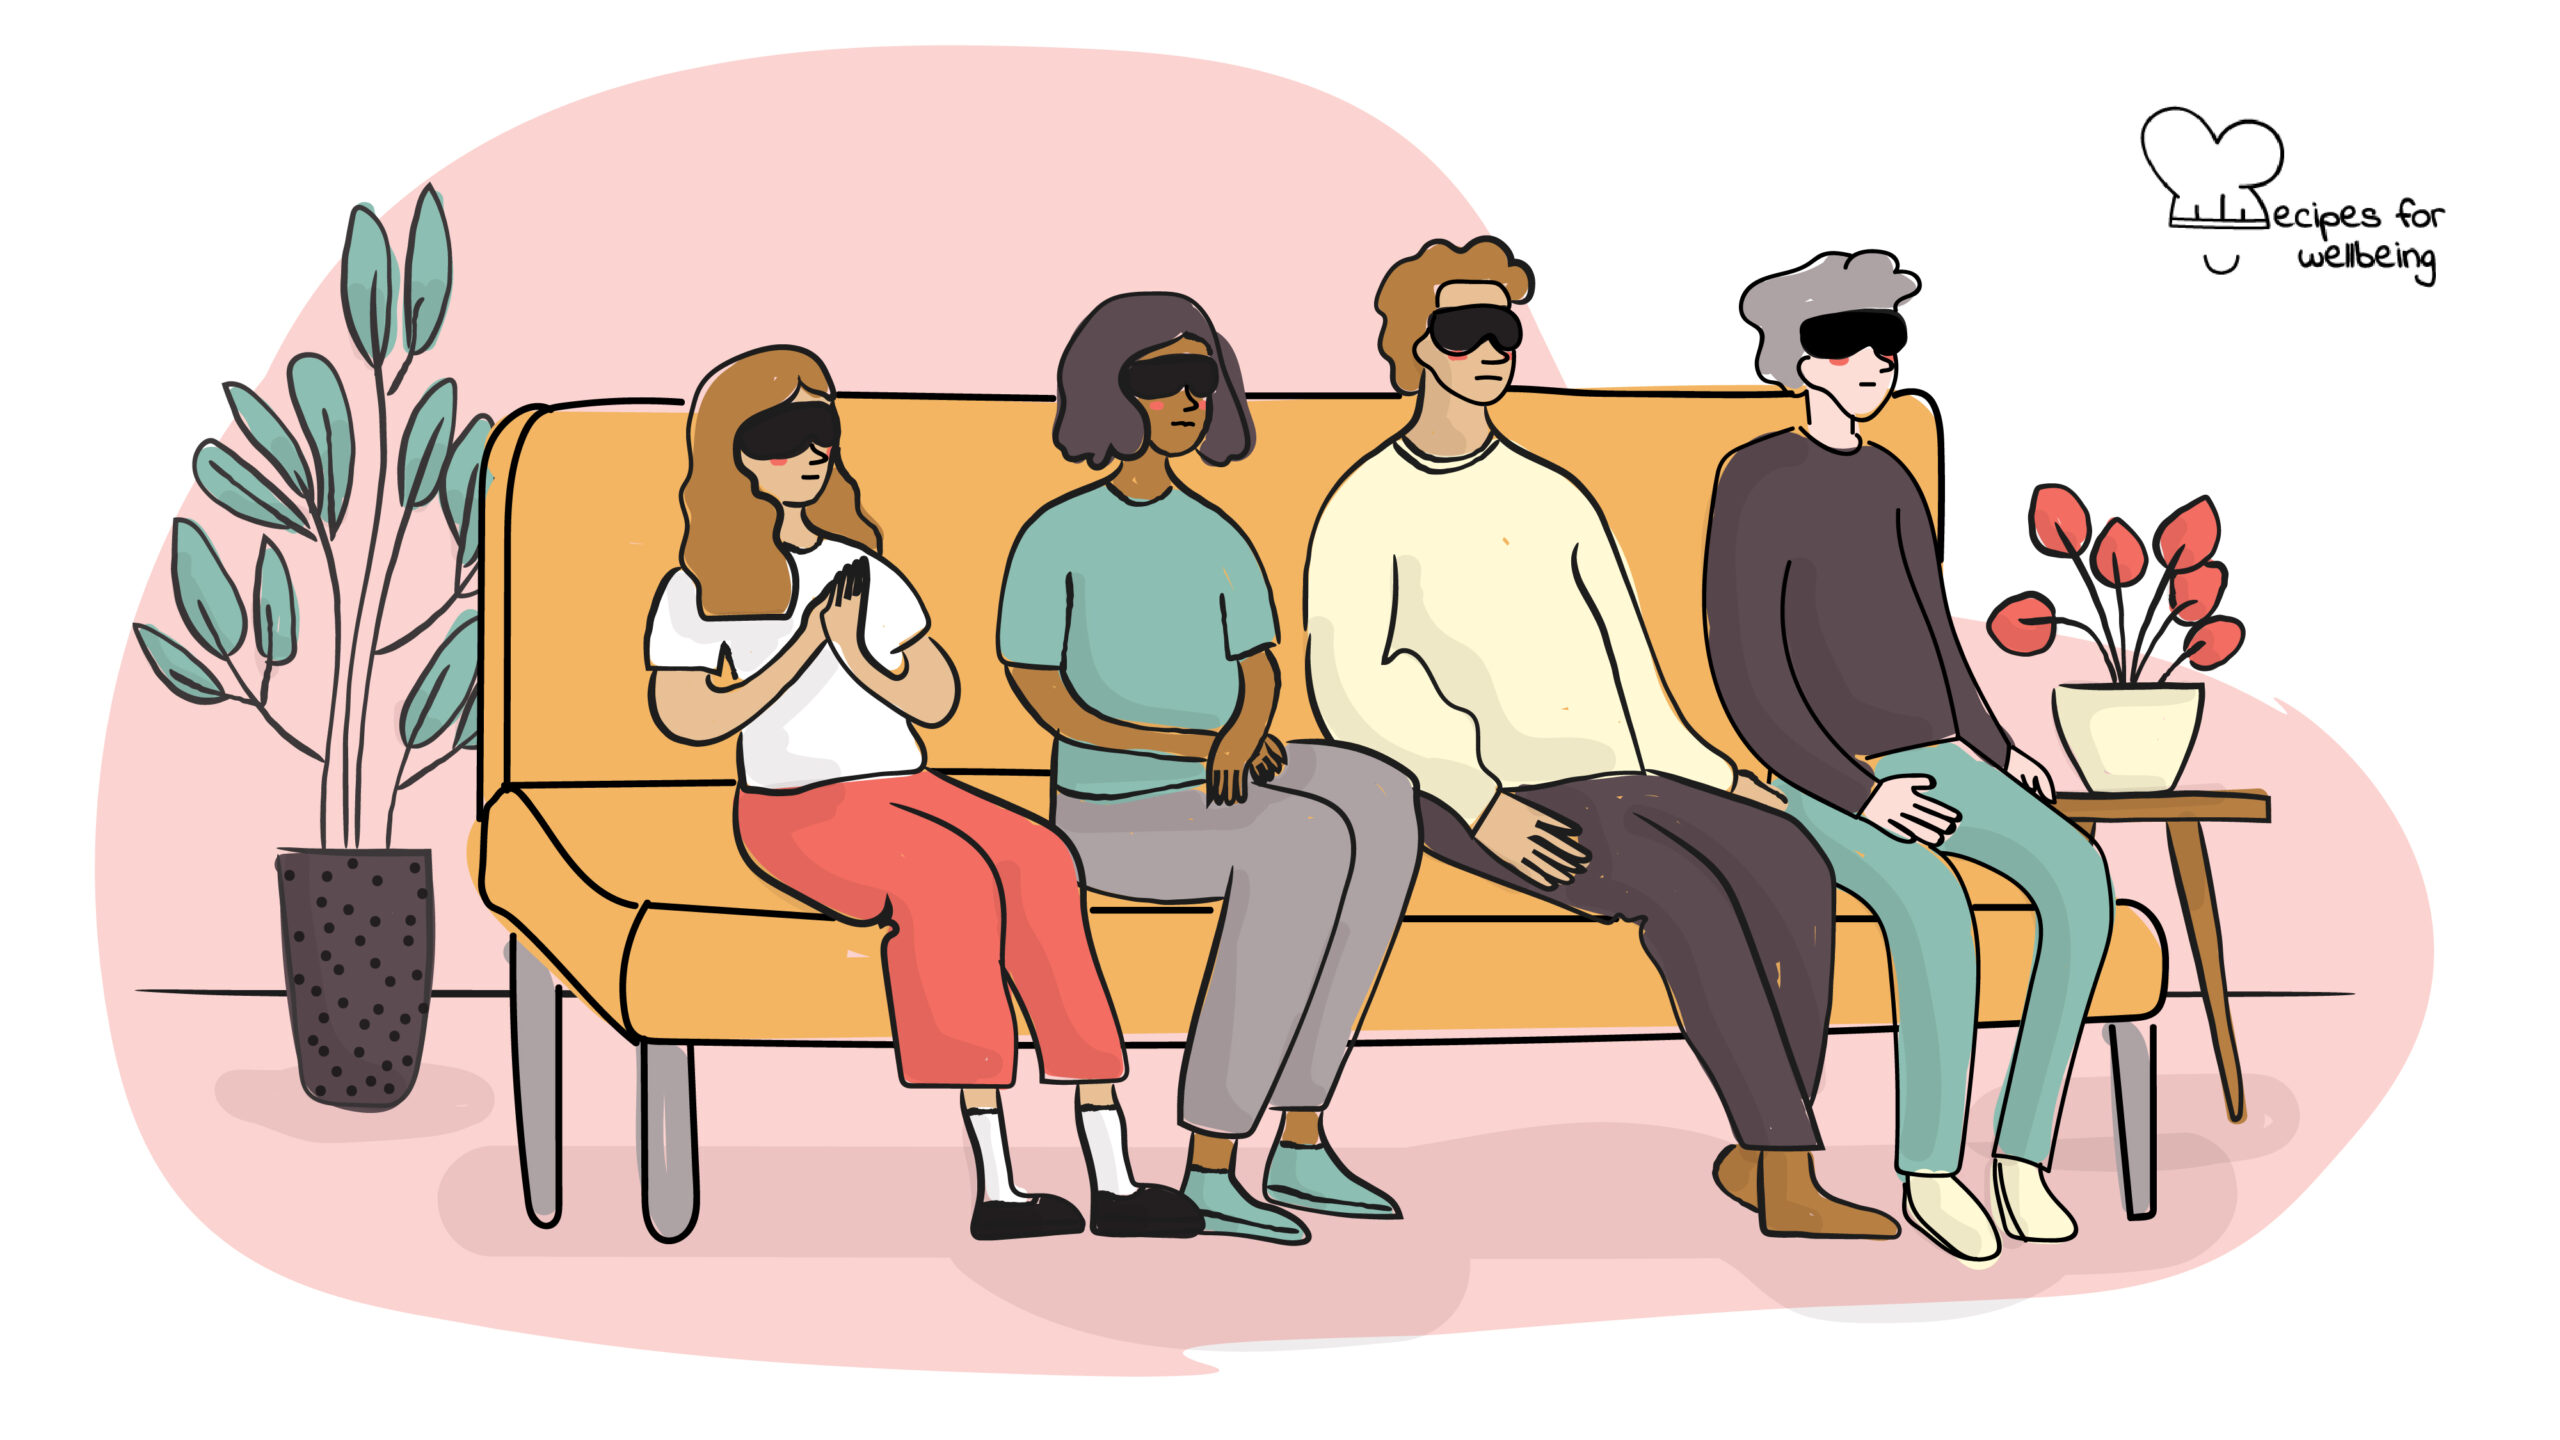 Illustration of a group of people sitting on a couch blindfolded. © Recipes for Wellbeing